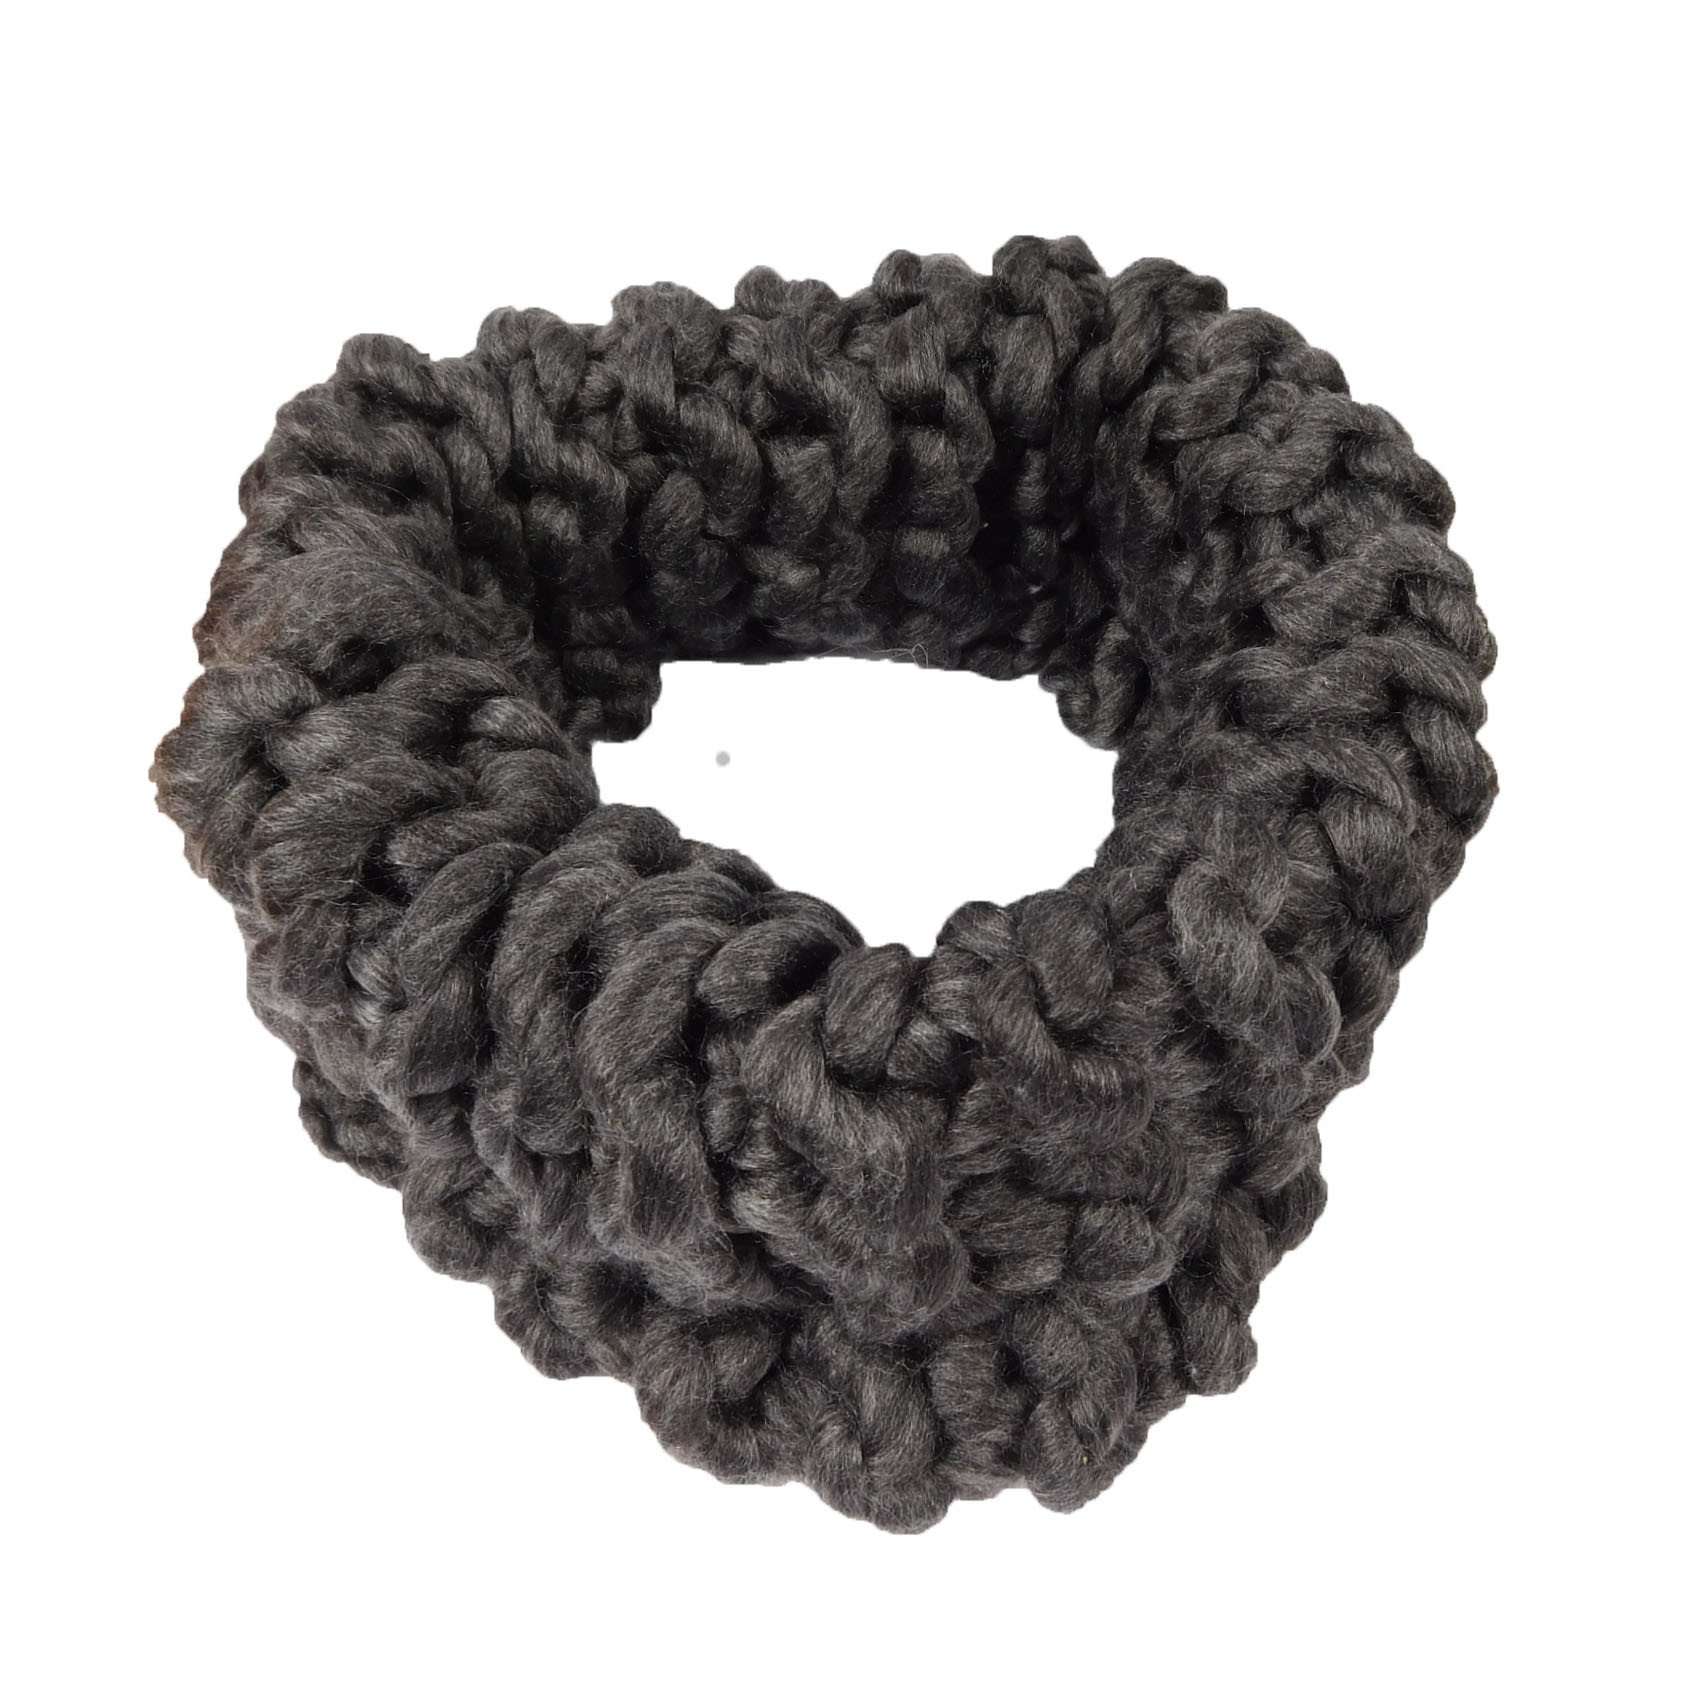 Chunky Knit Infinity Scarf - Cold Weather Accessories Sale ...